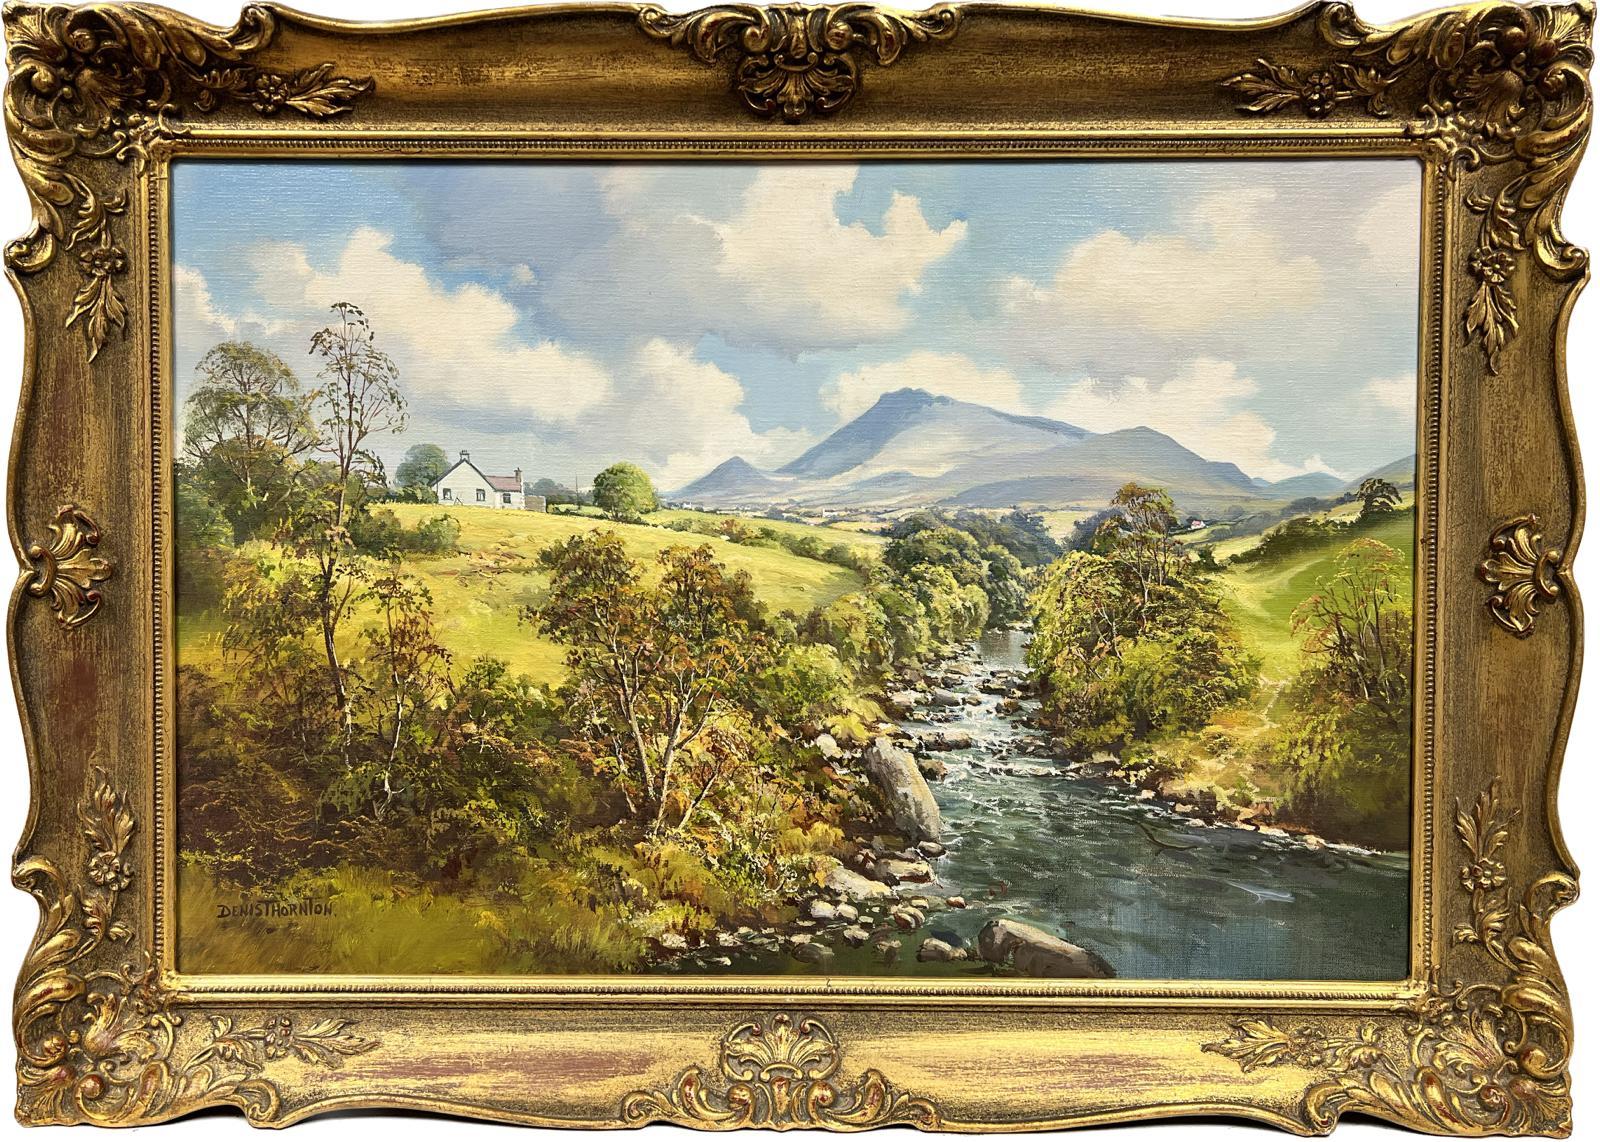 Dennis Thornton Landscape Painting - The Mourne Mountains County Down Ireland Large Landscape Oil Painting, signed